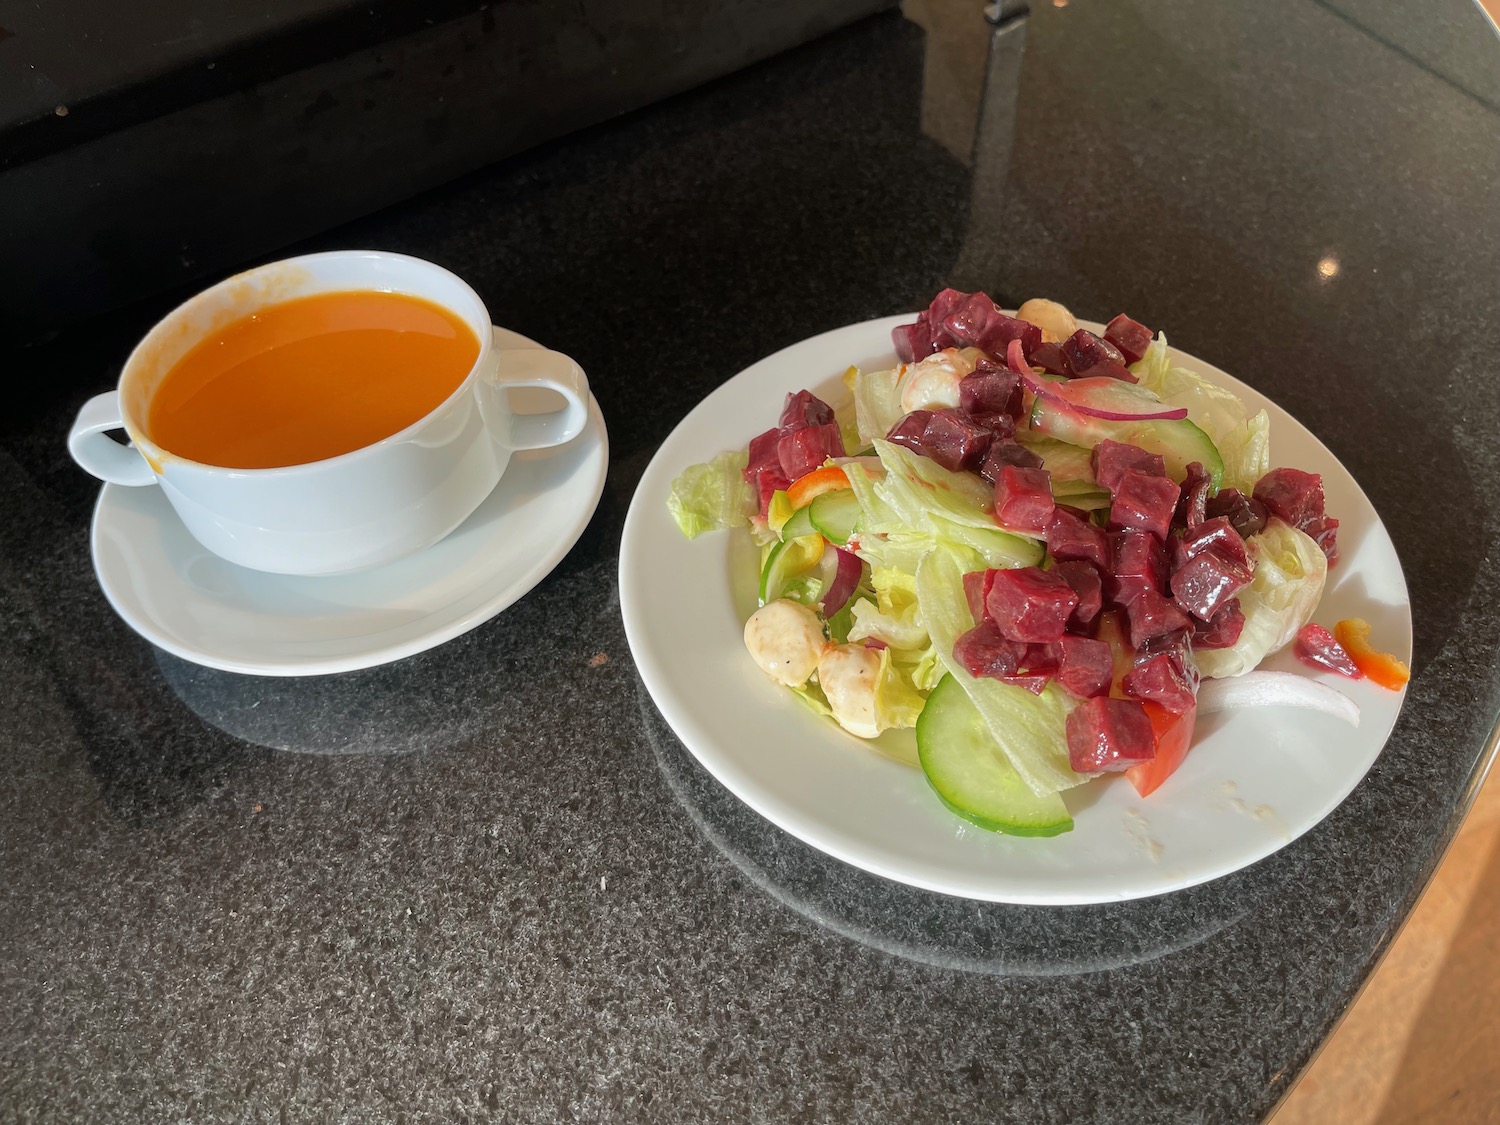 a plate of salad and a cup of orange juice